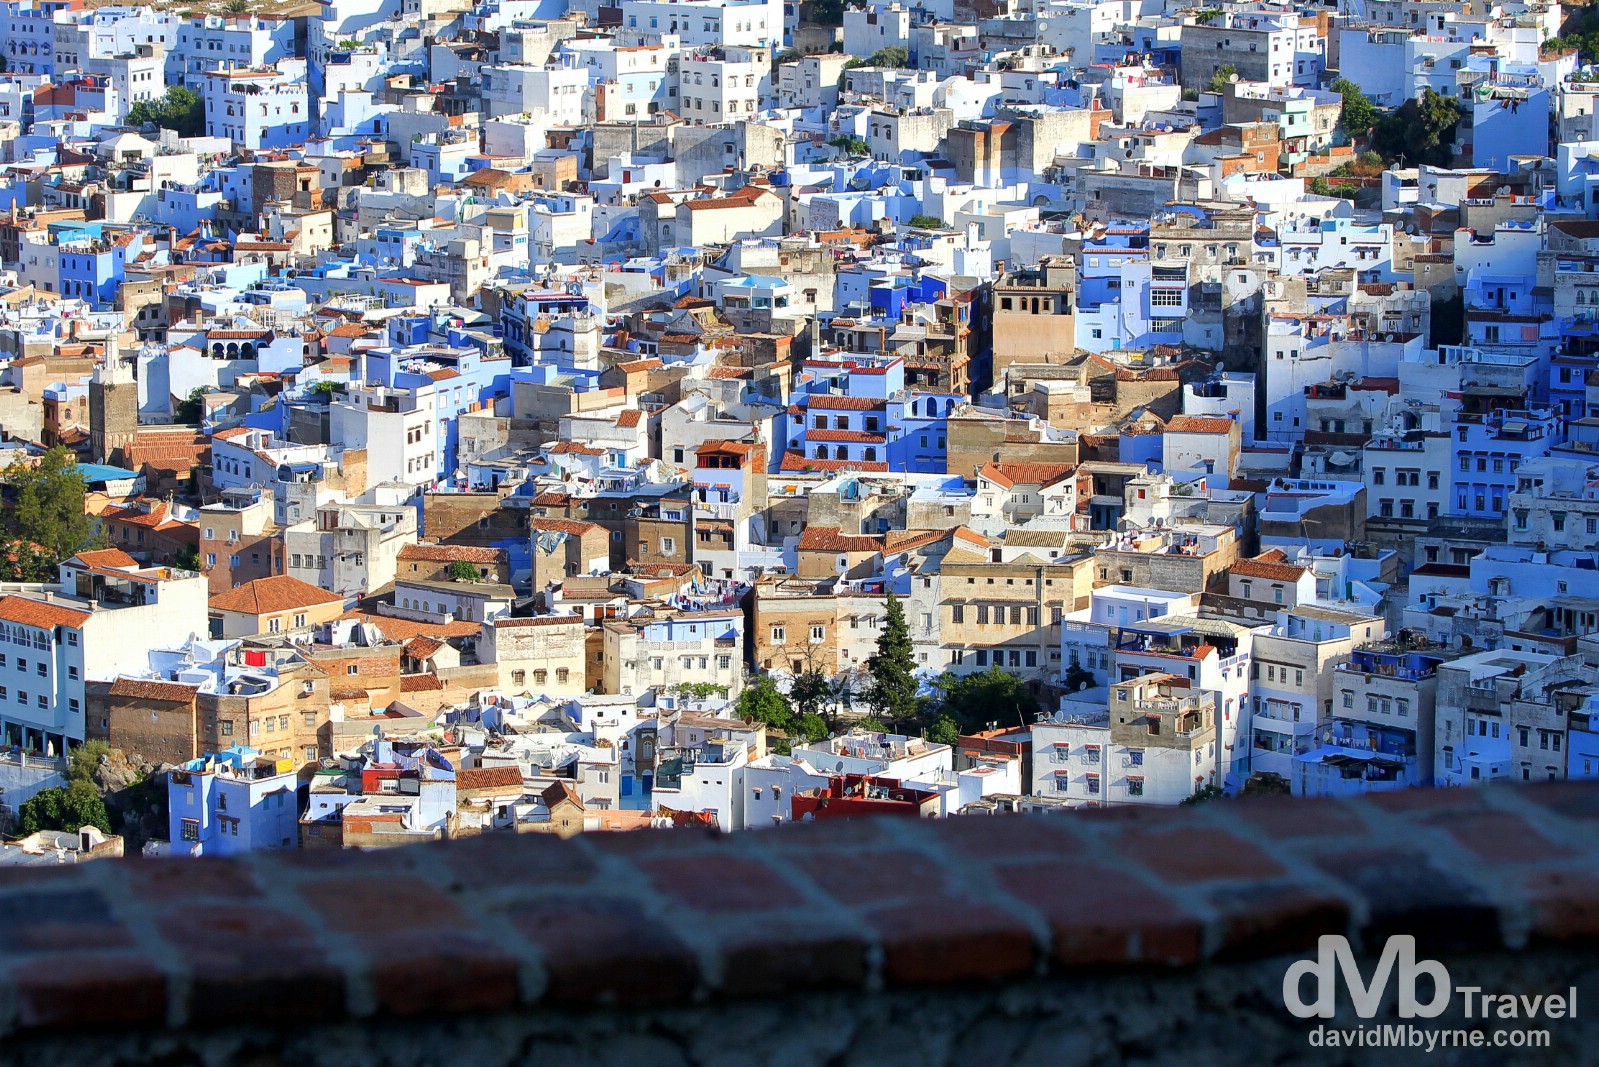 The rising sun creeps over a portion of the Chefchaouen Old Town as seen from the hills overlooking the town. Chefchaouen, Morocco. June 1st, 2014.